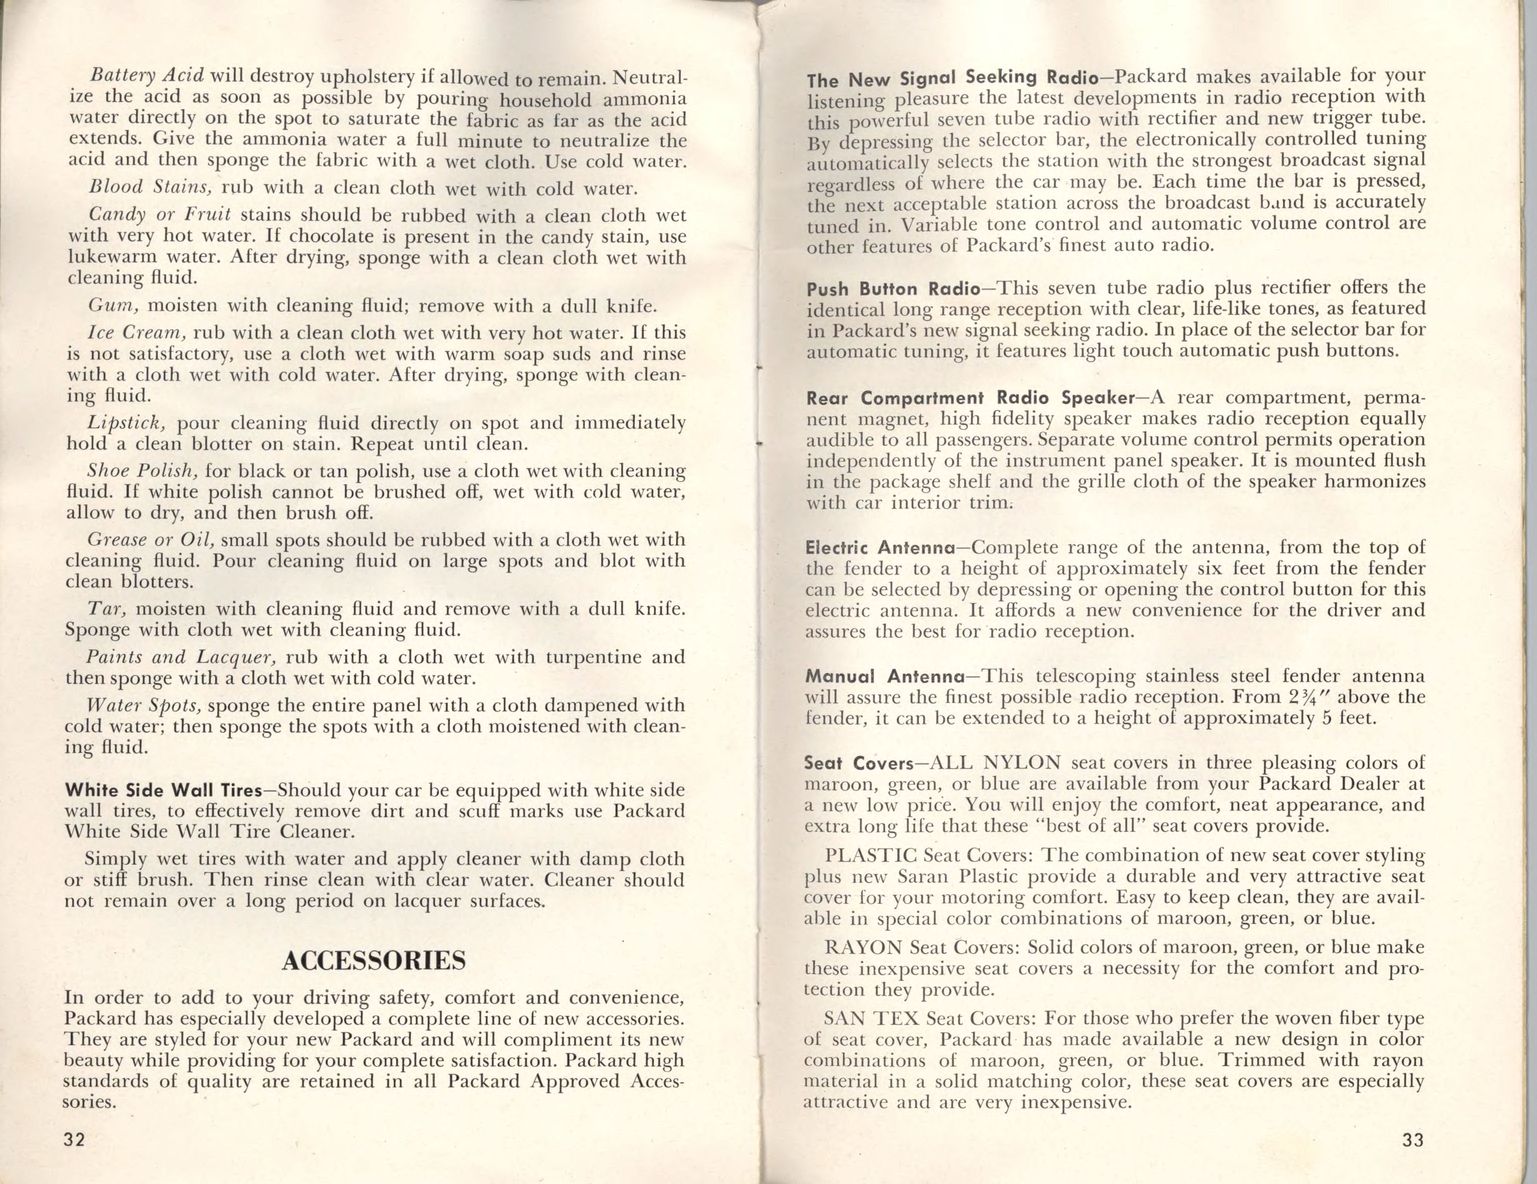 1951 Packard Owners Manual Page 1